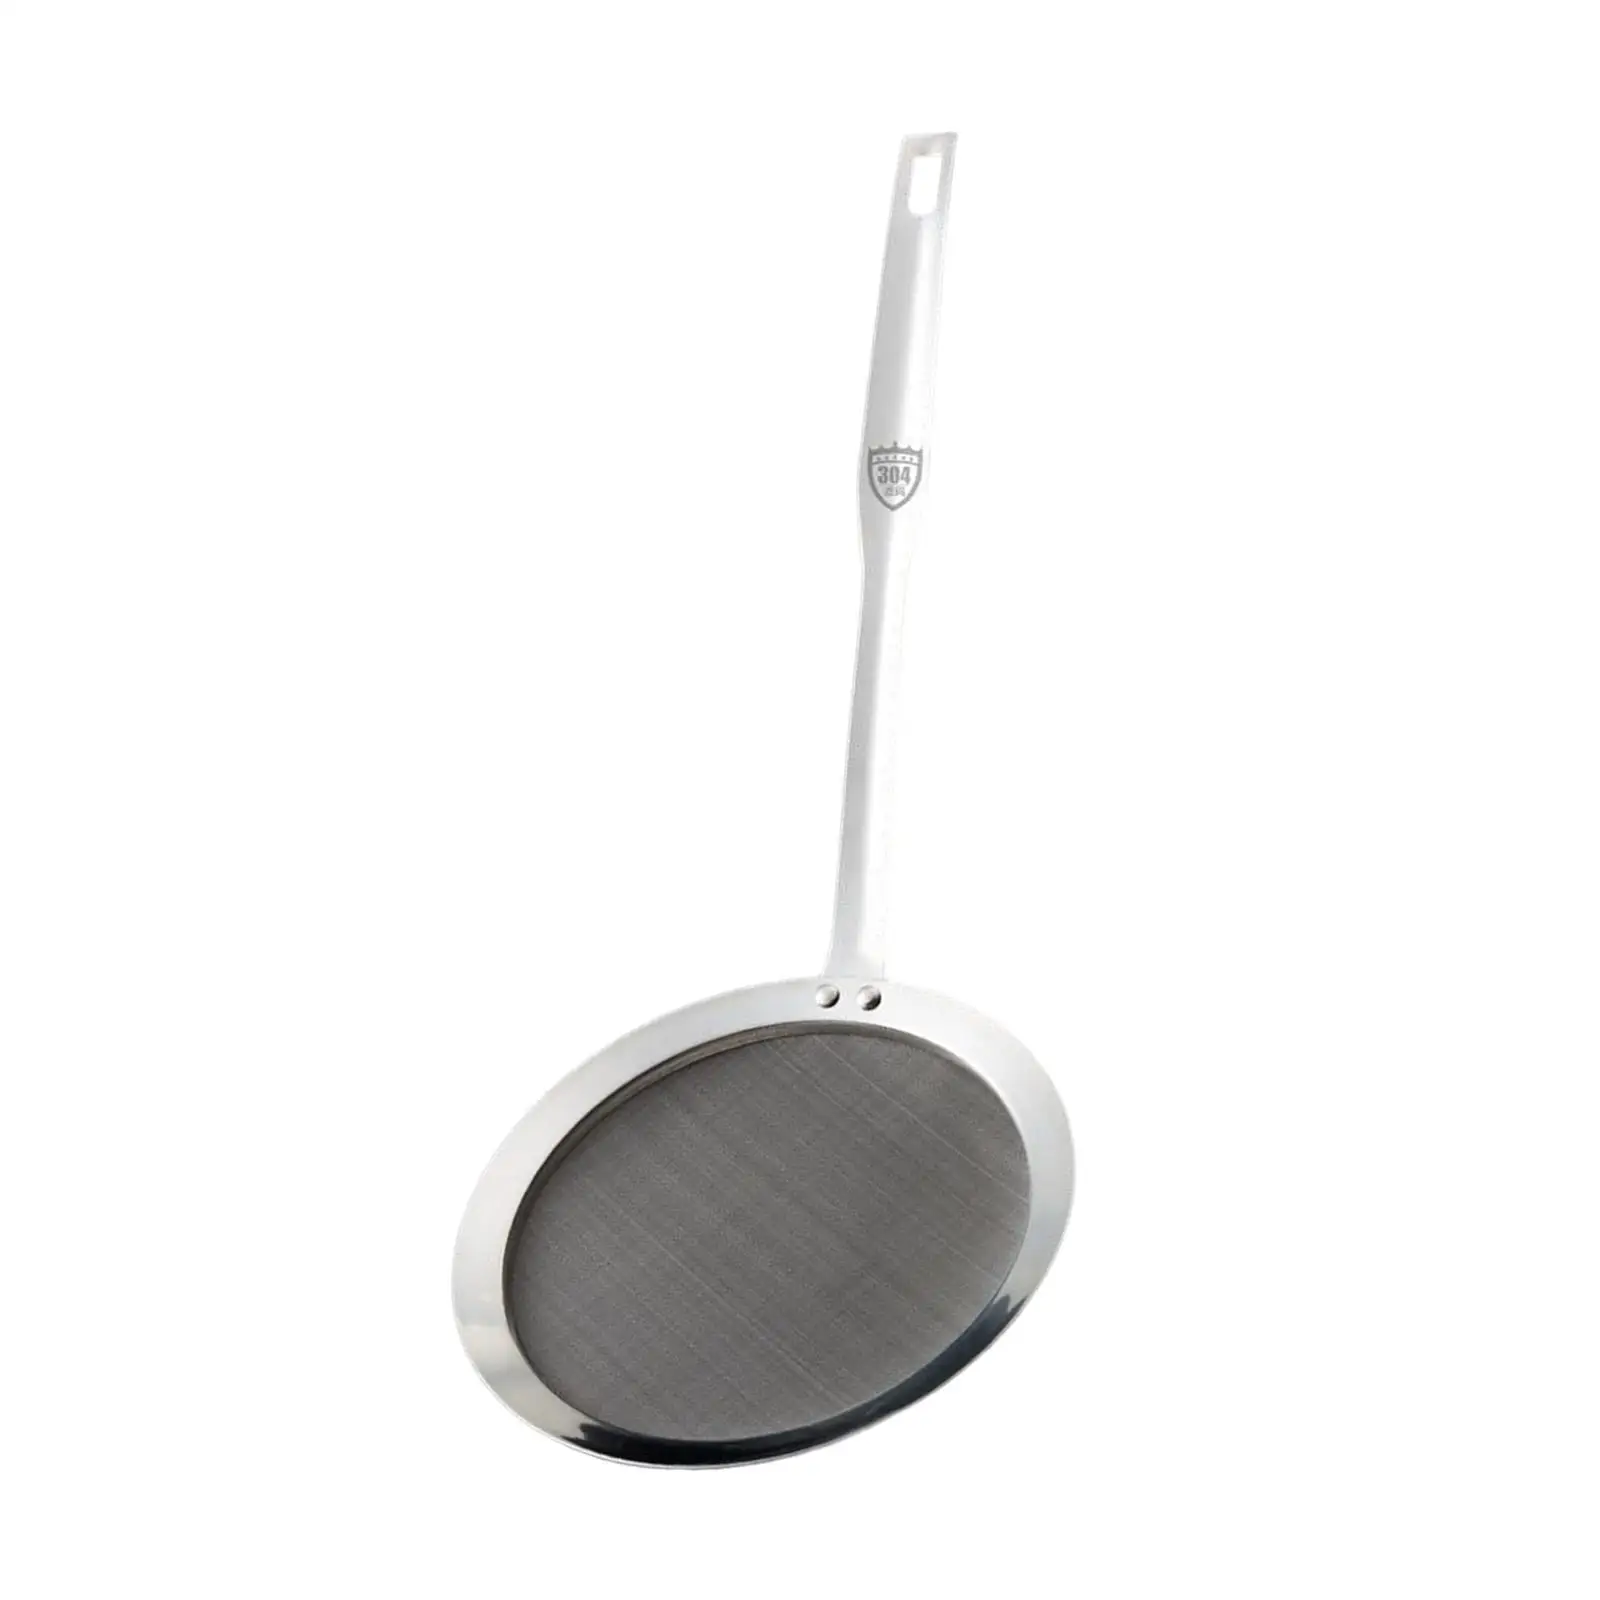 Oil Filter Strainer Foam and Fishing Sieve Spoon for Skimming Cooking